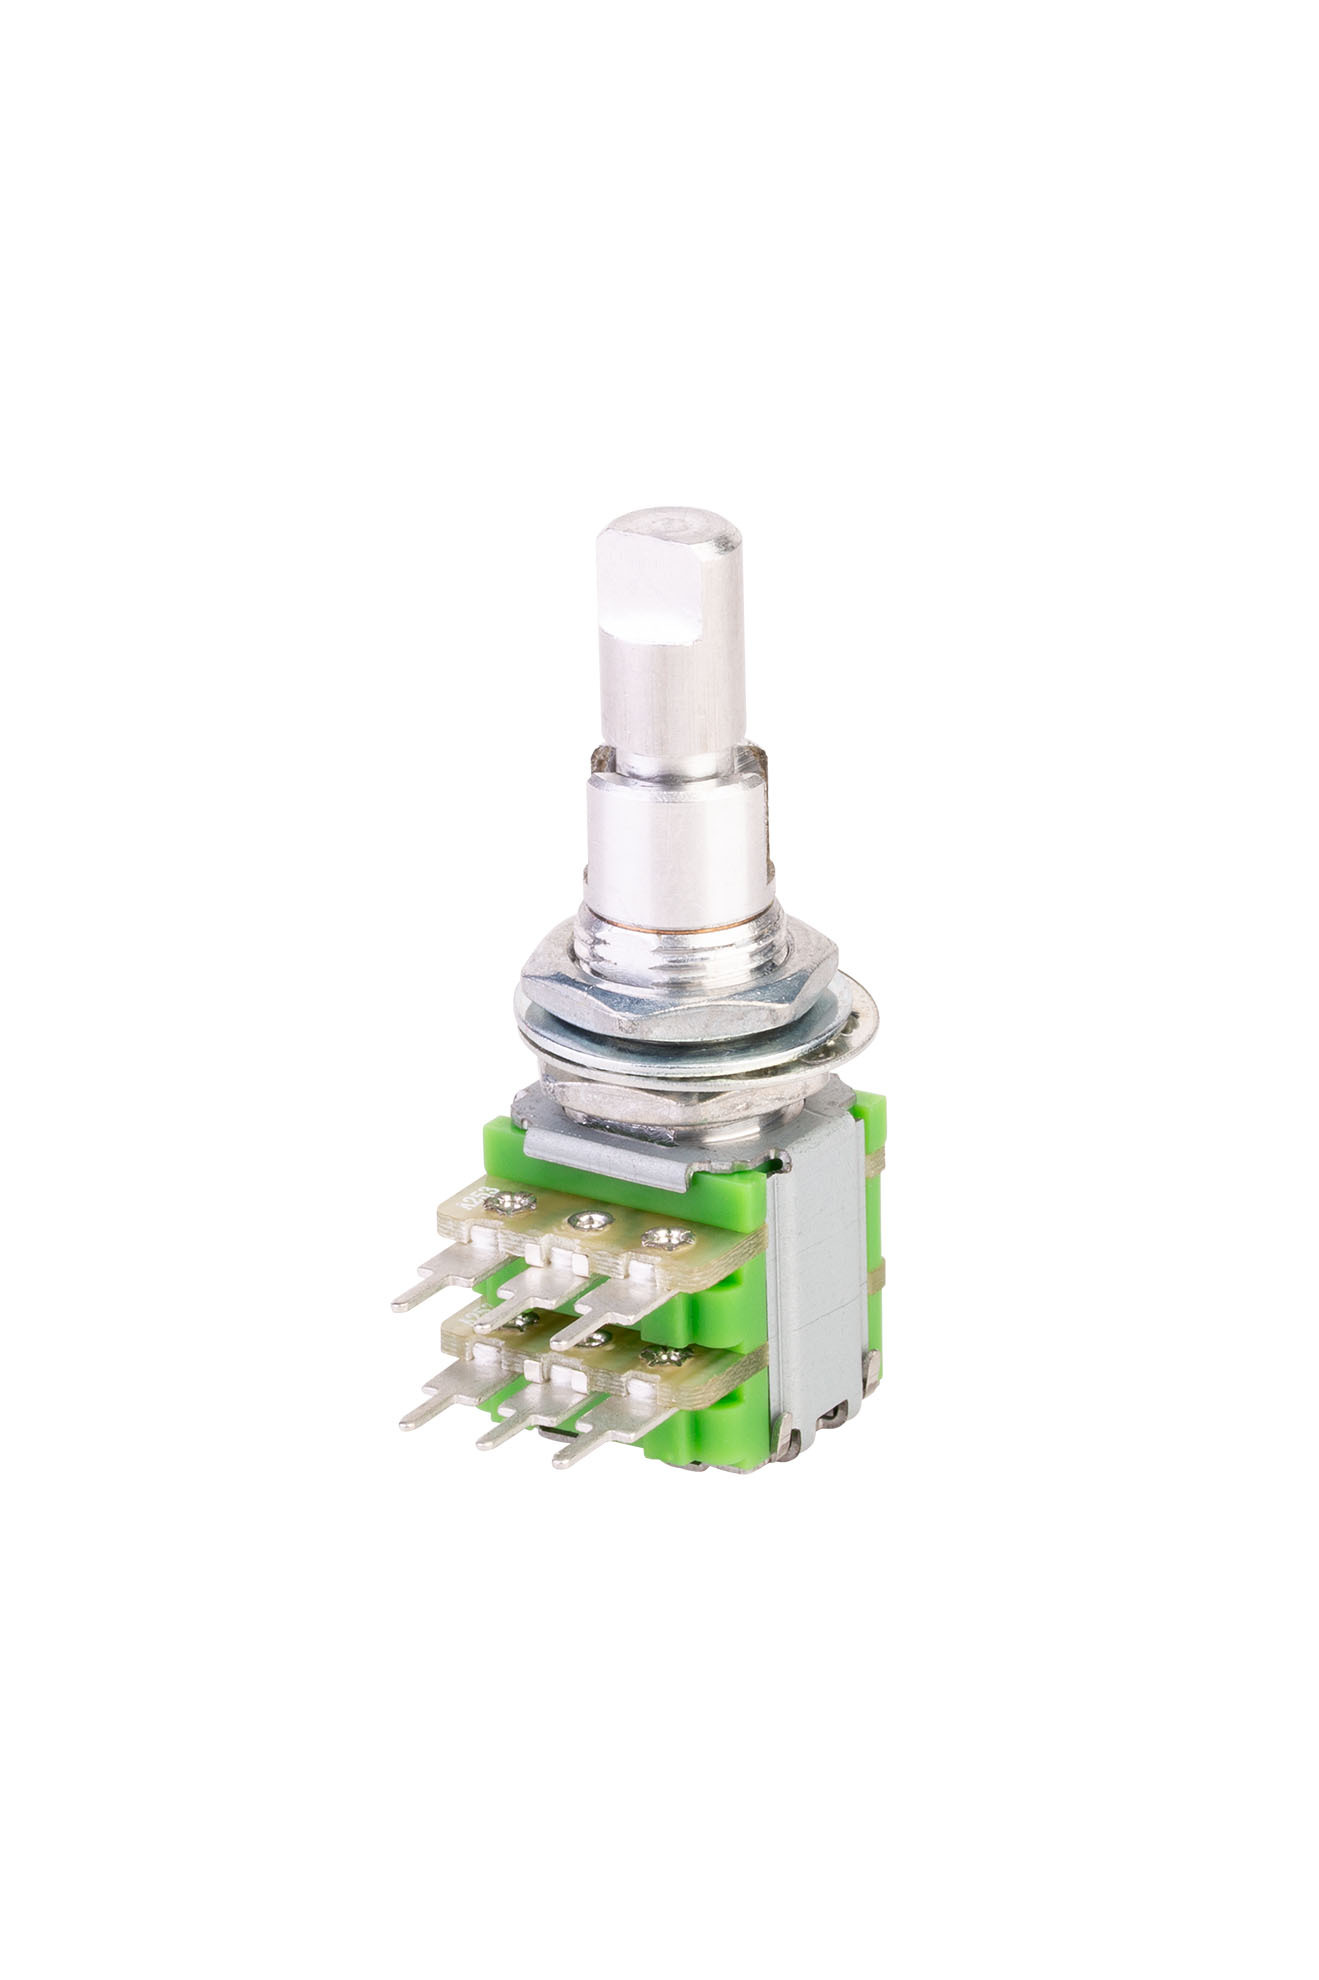 MEC Mono Stacked Potentiometer, A25K / A25K, concentric Solid Shaft